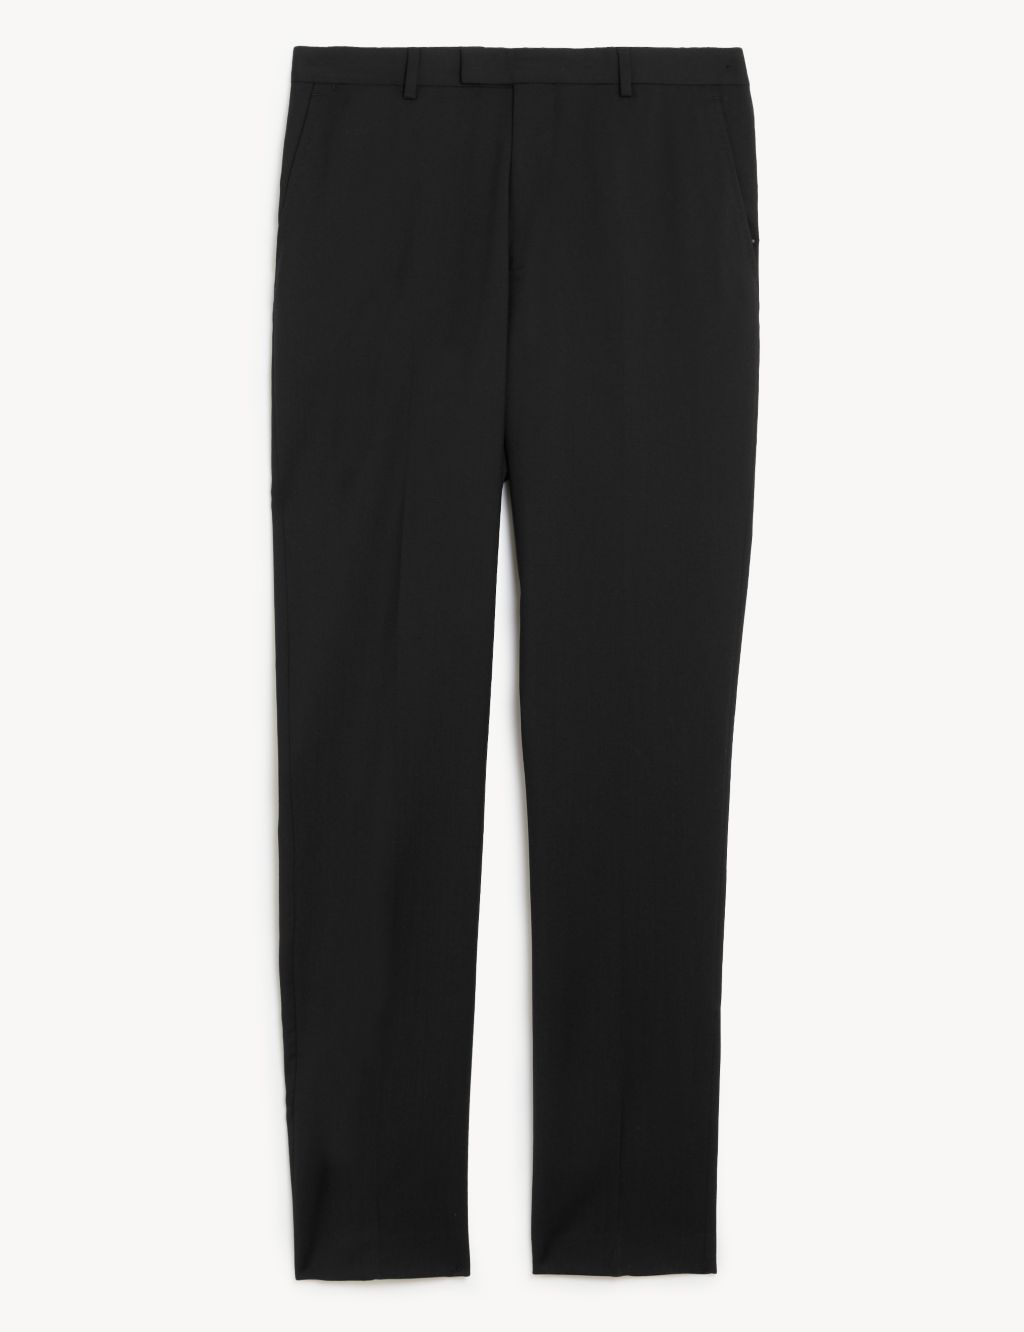 Slim Fit Pure Wool Twill Trousers image 1